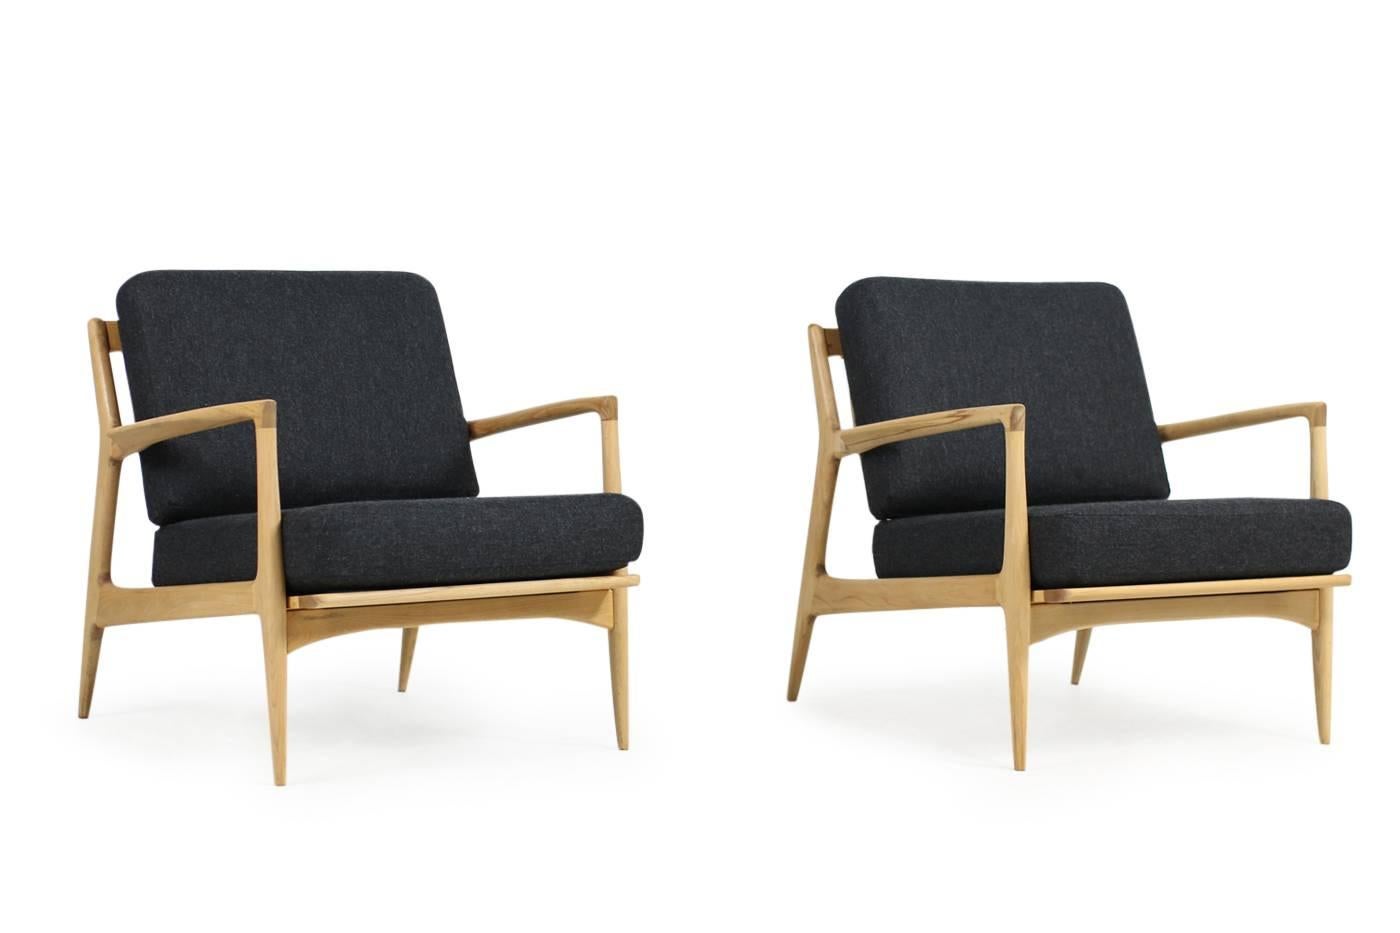 Beautiful set of two matching, organic 1960s easy chairs, designed by Ib Kofod Larsen, beechwood, new upholstery and new high quality wool woven fabric (very dark grey, almost black) fantastic condition, beautiful form and design.